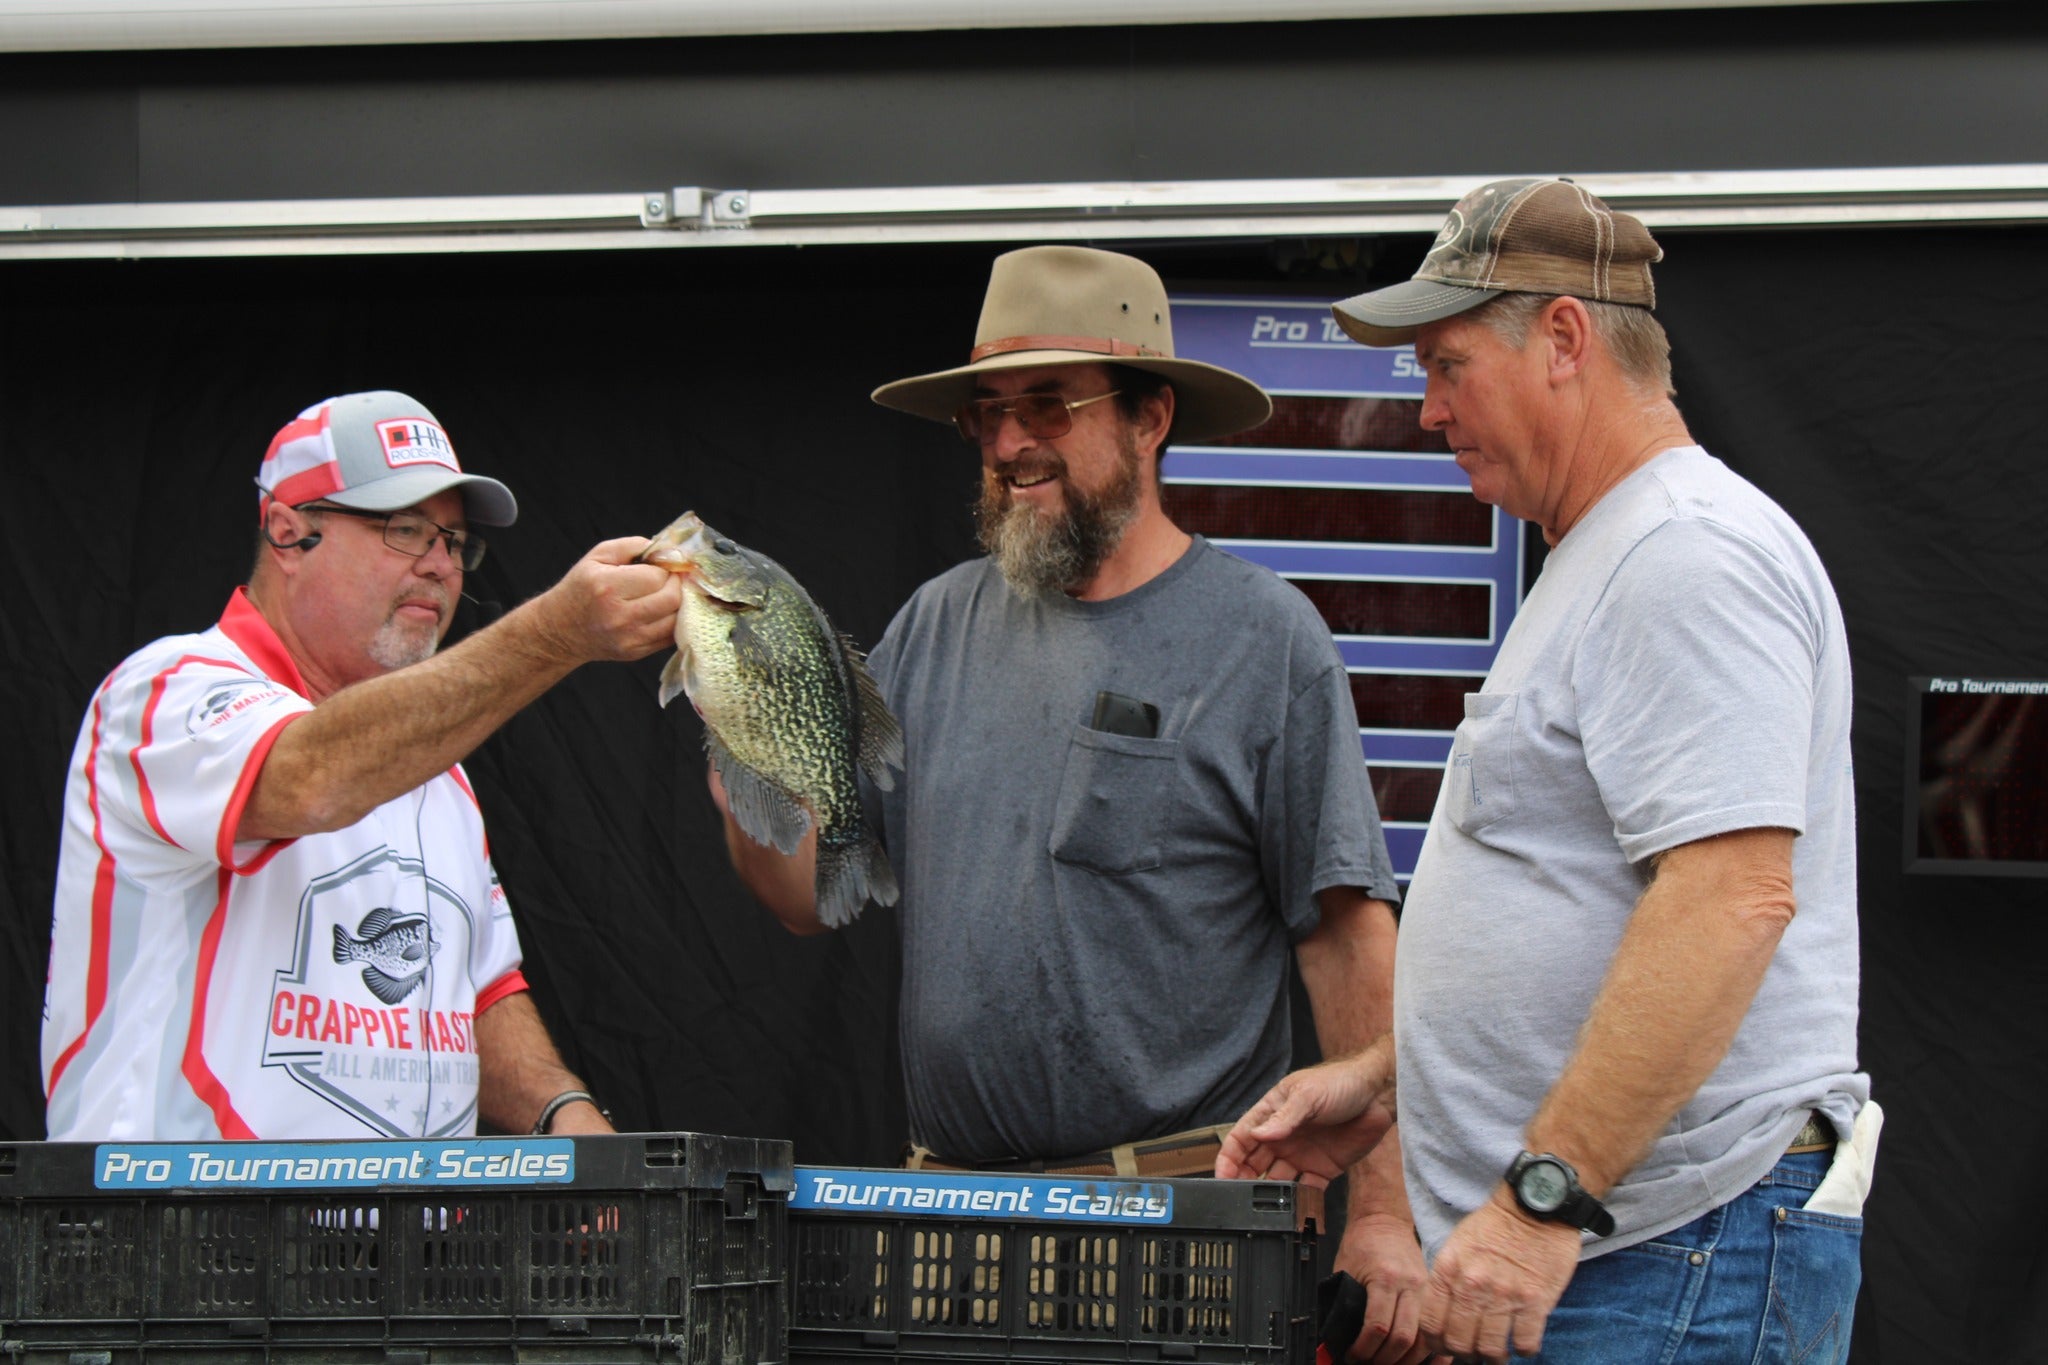 Anglers Win 10,000 Crappie Fishing with Cane Poles Field & Stream